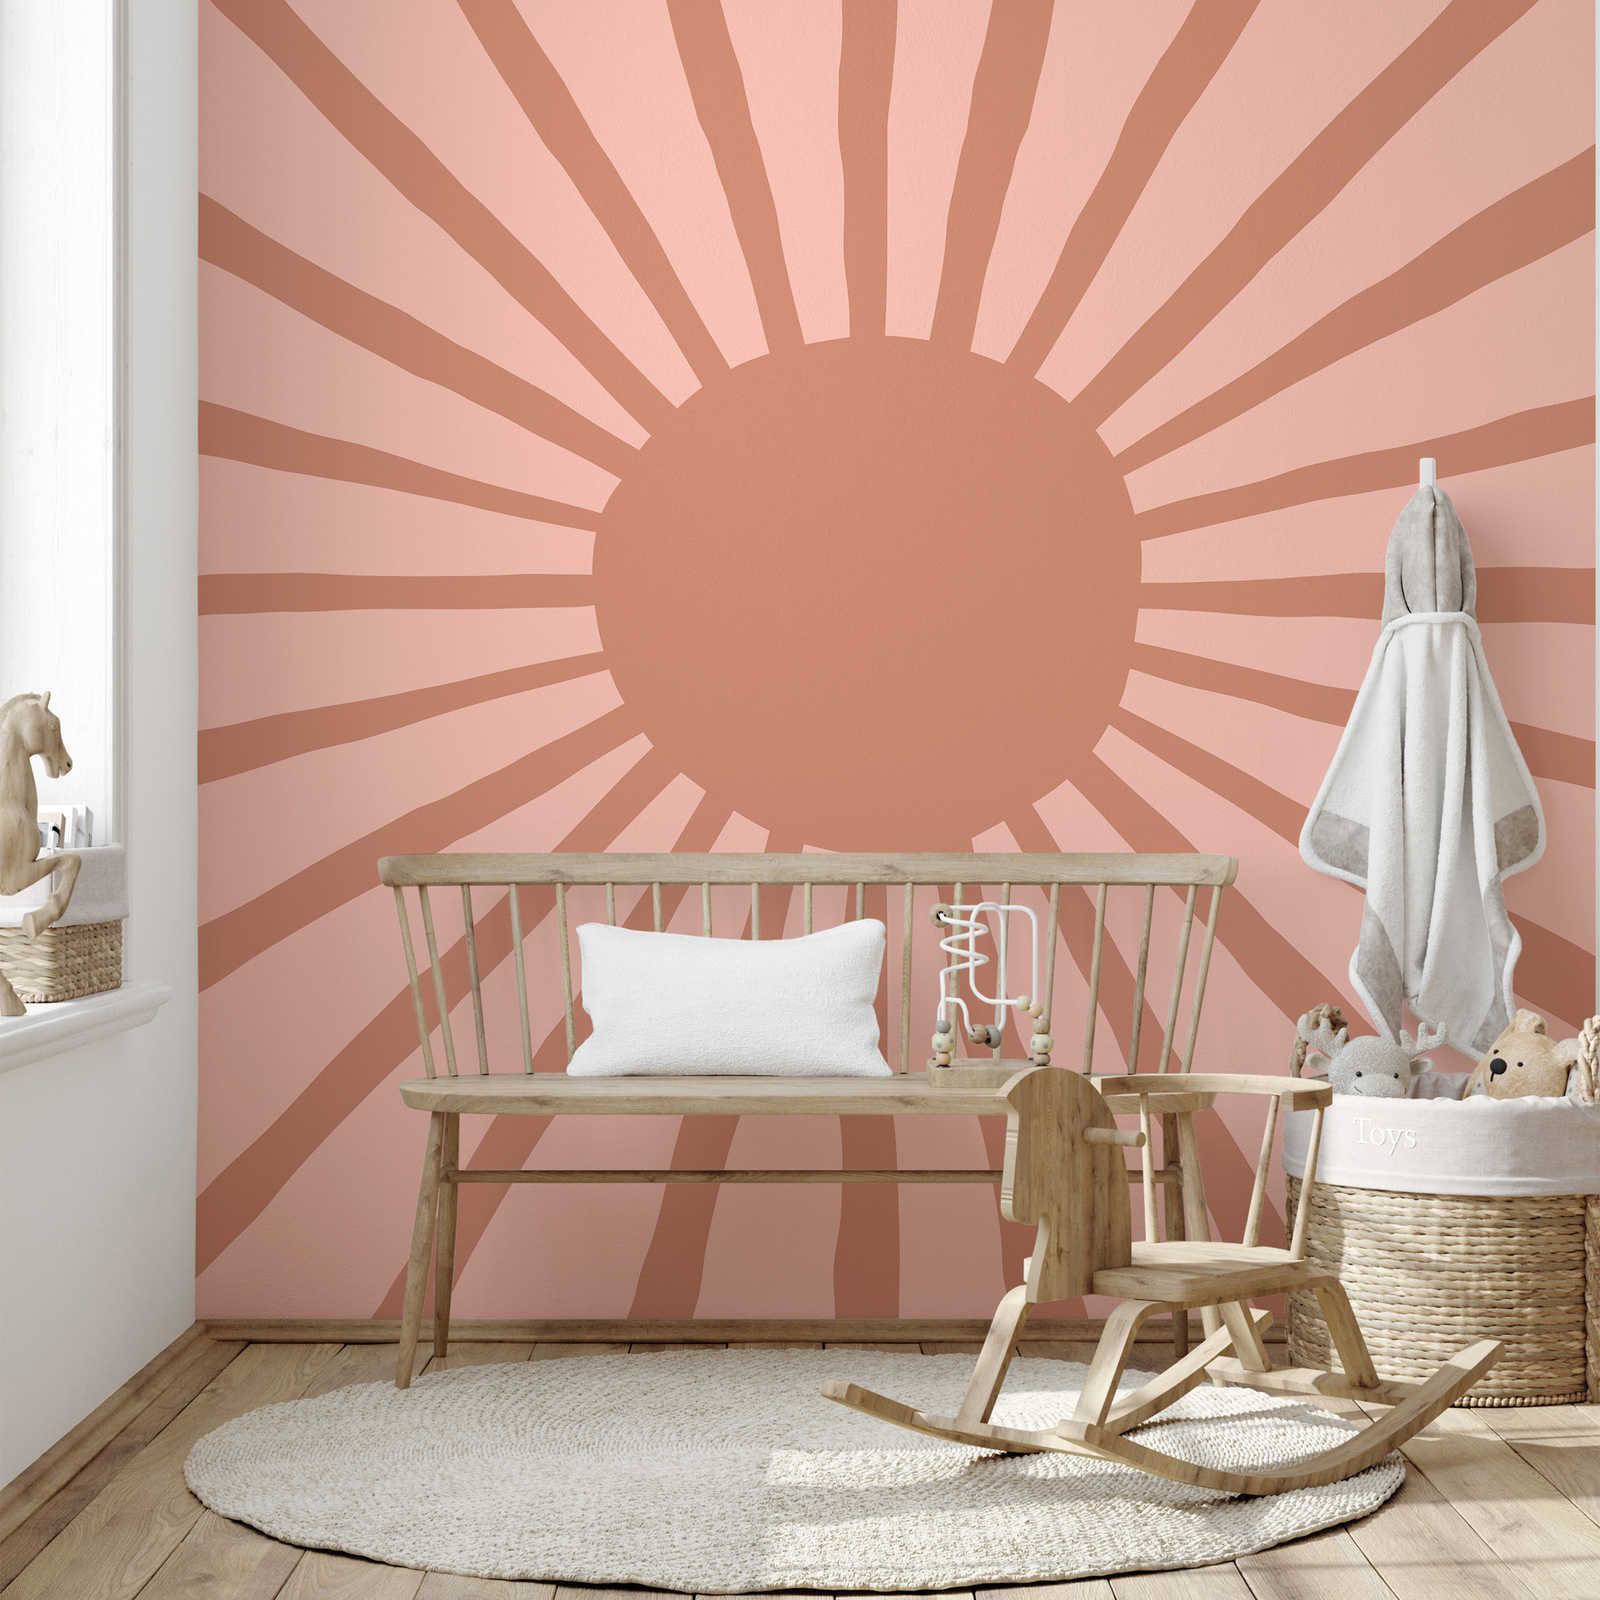 Painted Style Abstract Sun Wallpaper - Smooth & Matte Non-woven
